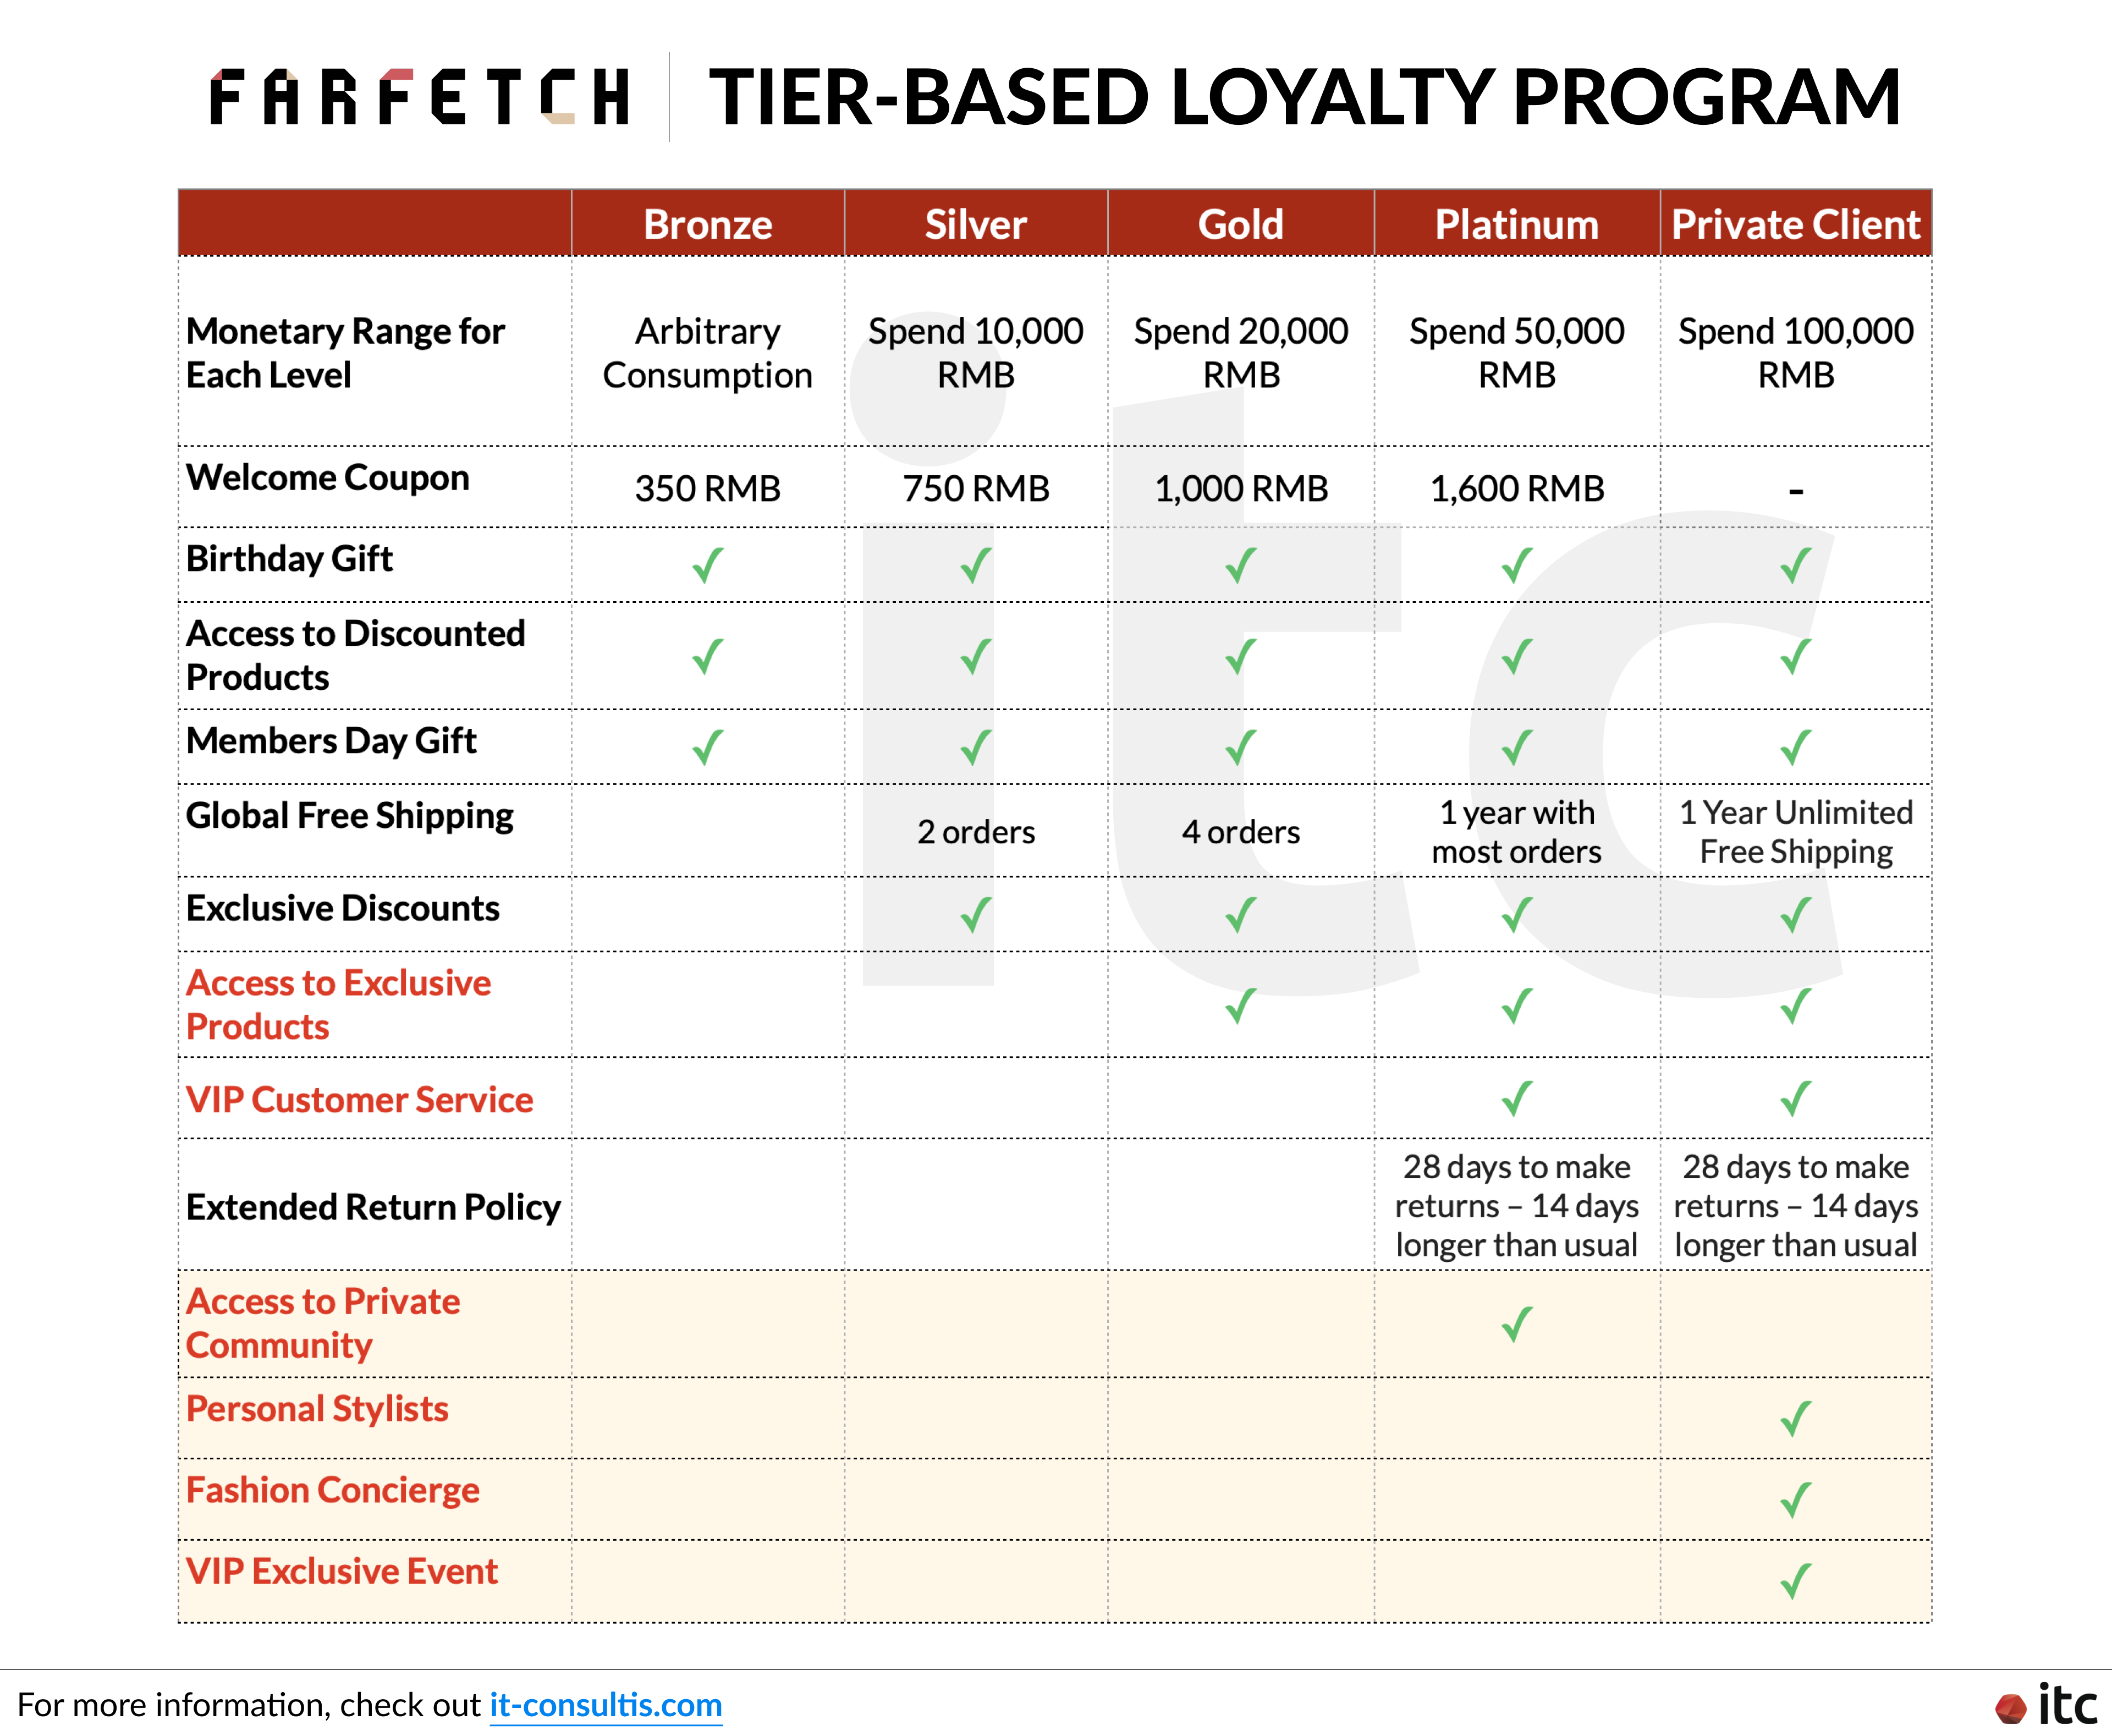 Farfetch Tier-based loyalty program features 5 different tiers - Bronze, Silver, Gold, Platinum, and Private Client - differing from each other by monetary spending. The higher the ranking, the more access to perks.